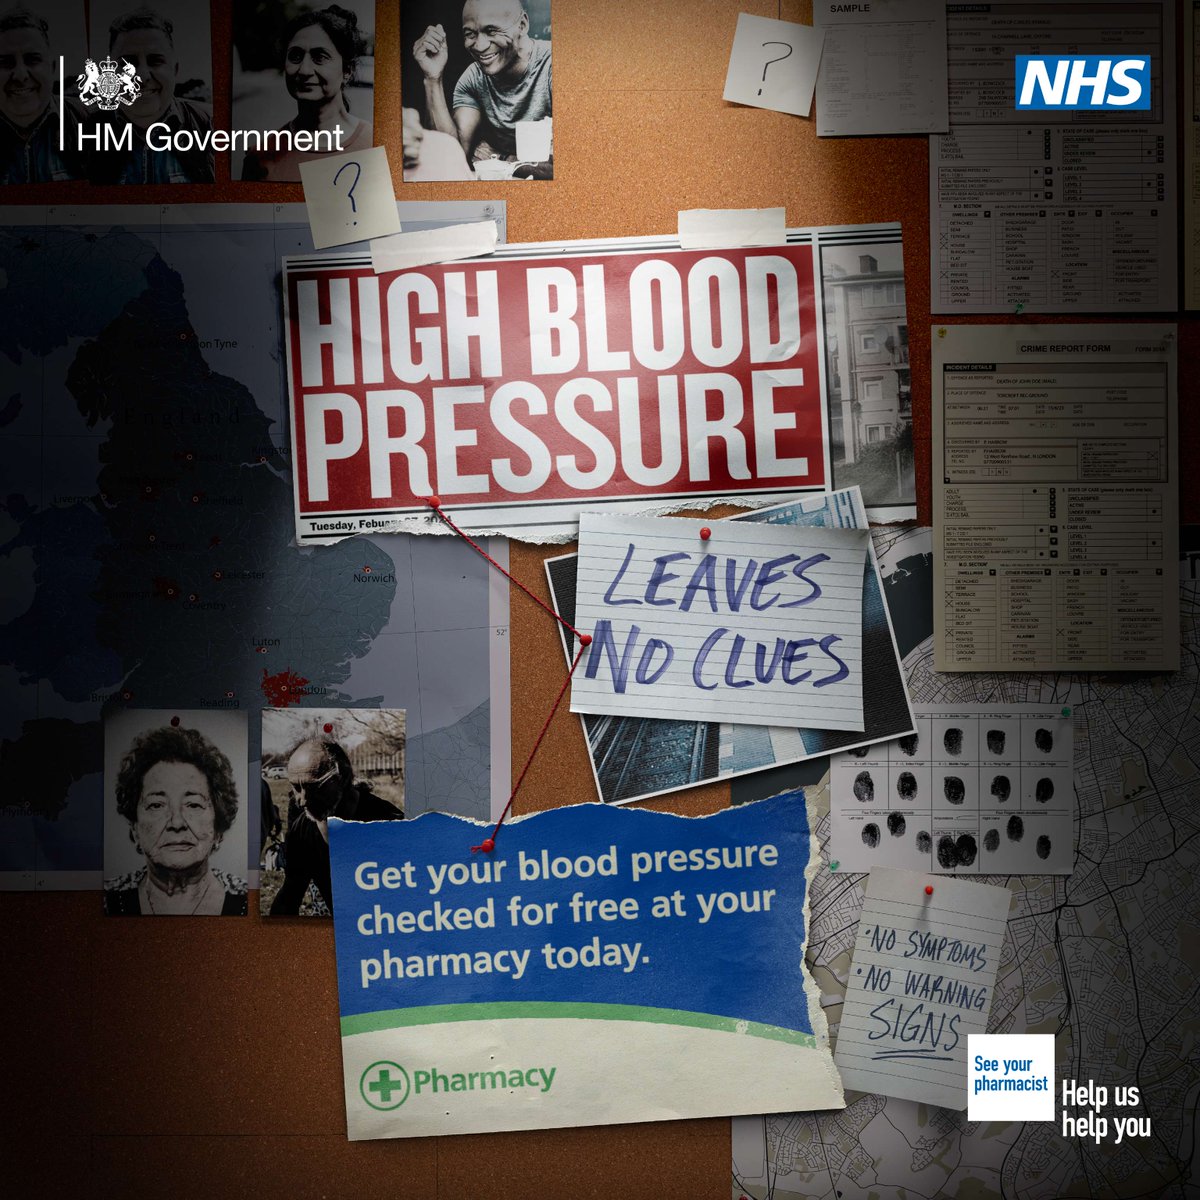 Have you had your blood pressure checked recently? It's the best way to know if you're at risk of hypertension - this #MayMeasureMonth, and always, make your health a priority. Find a pharmacy near you that offers free blood pressure checks: nhs.uk/nhs-services/p…